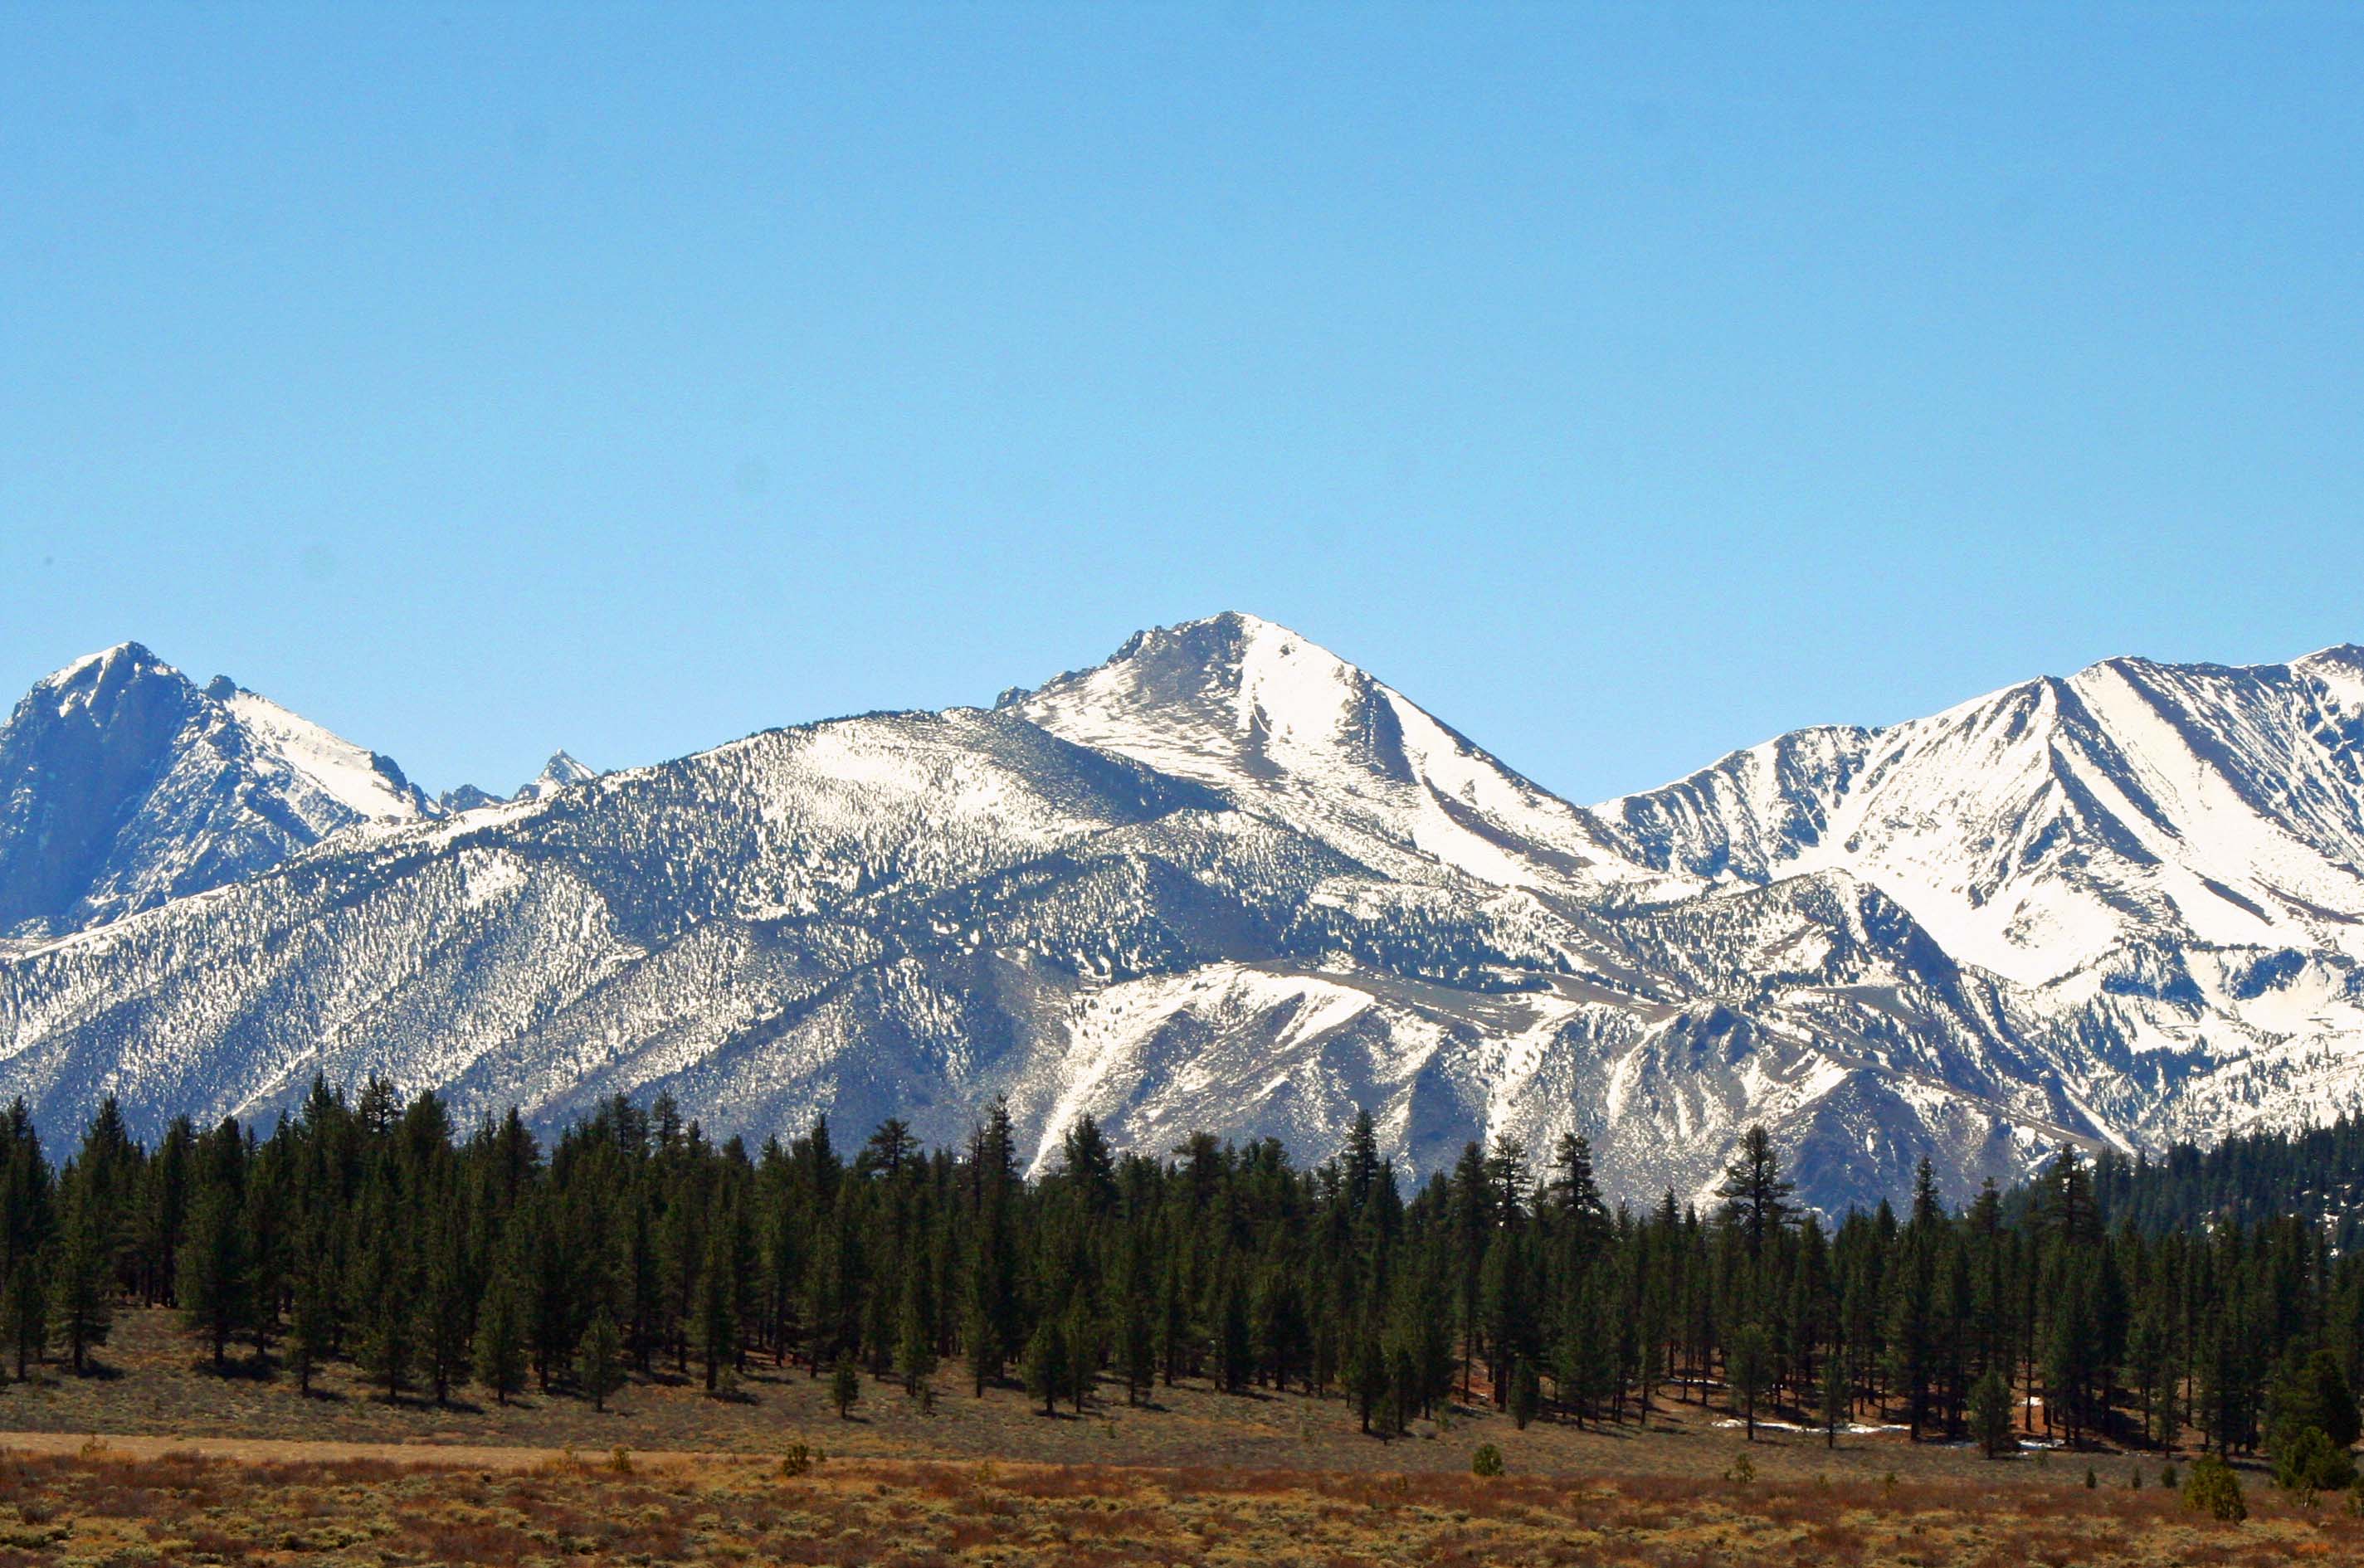 Another view of the Sierra Nevada Mountains along highway 395.